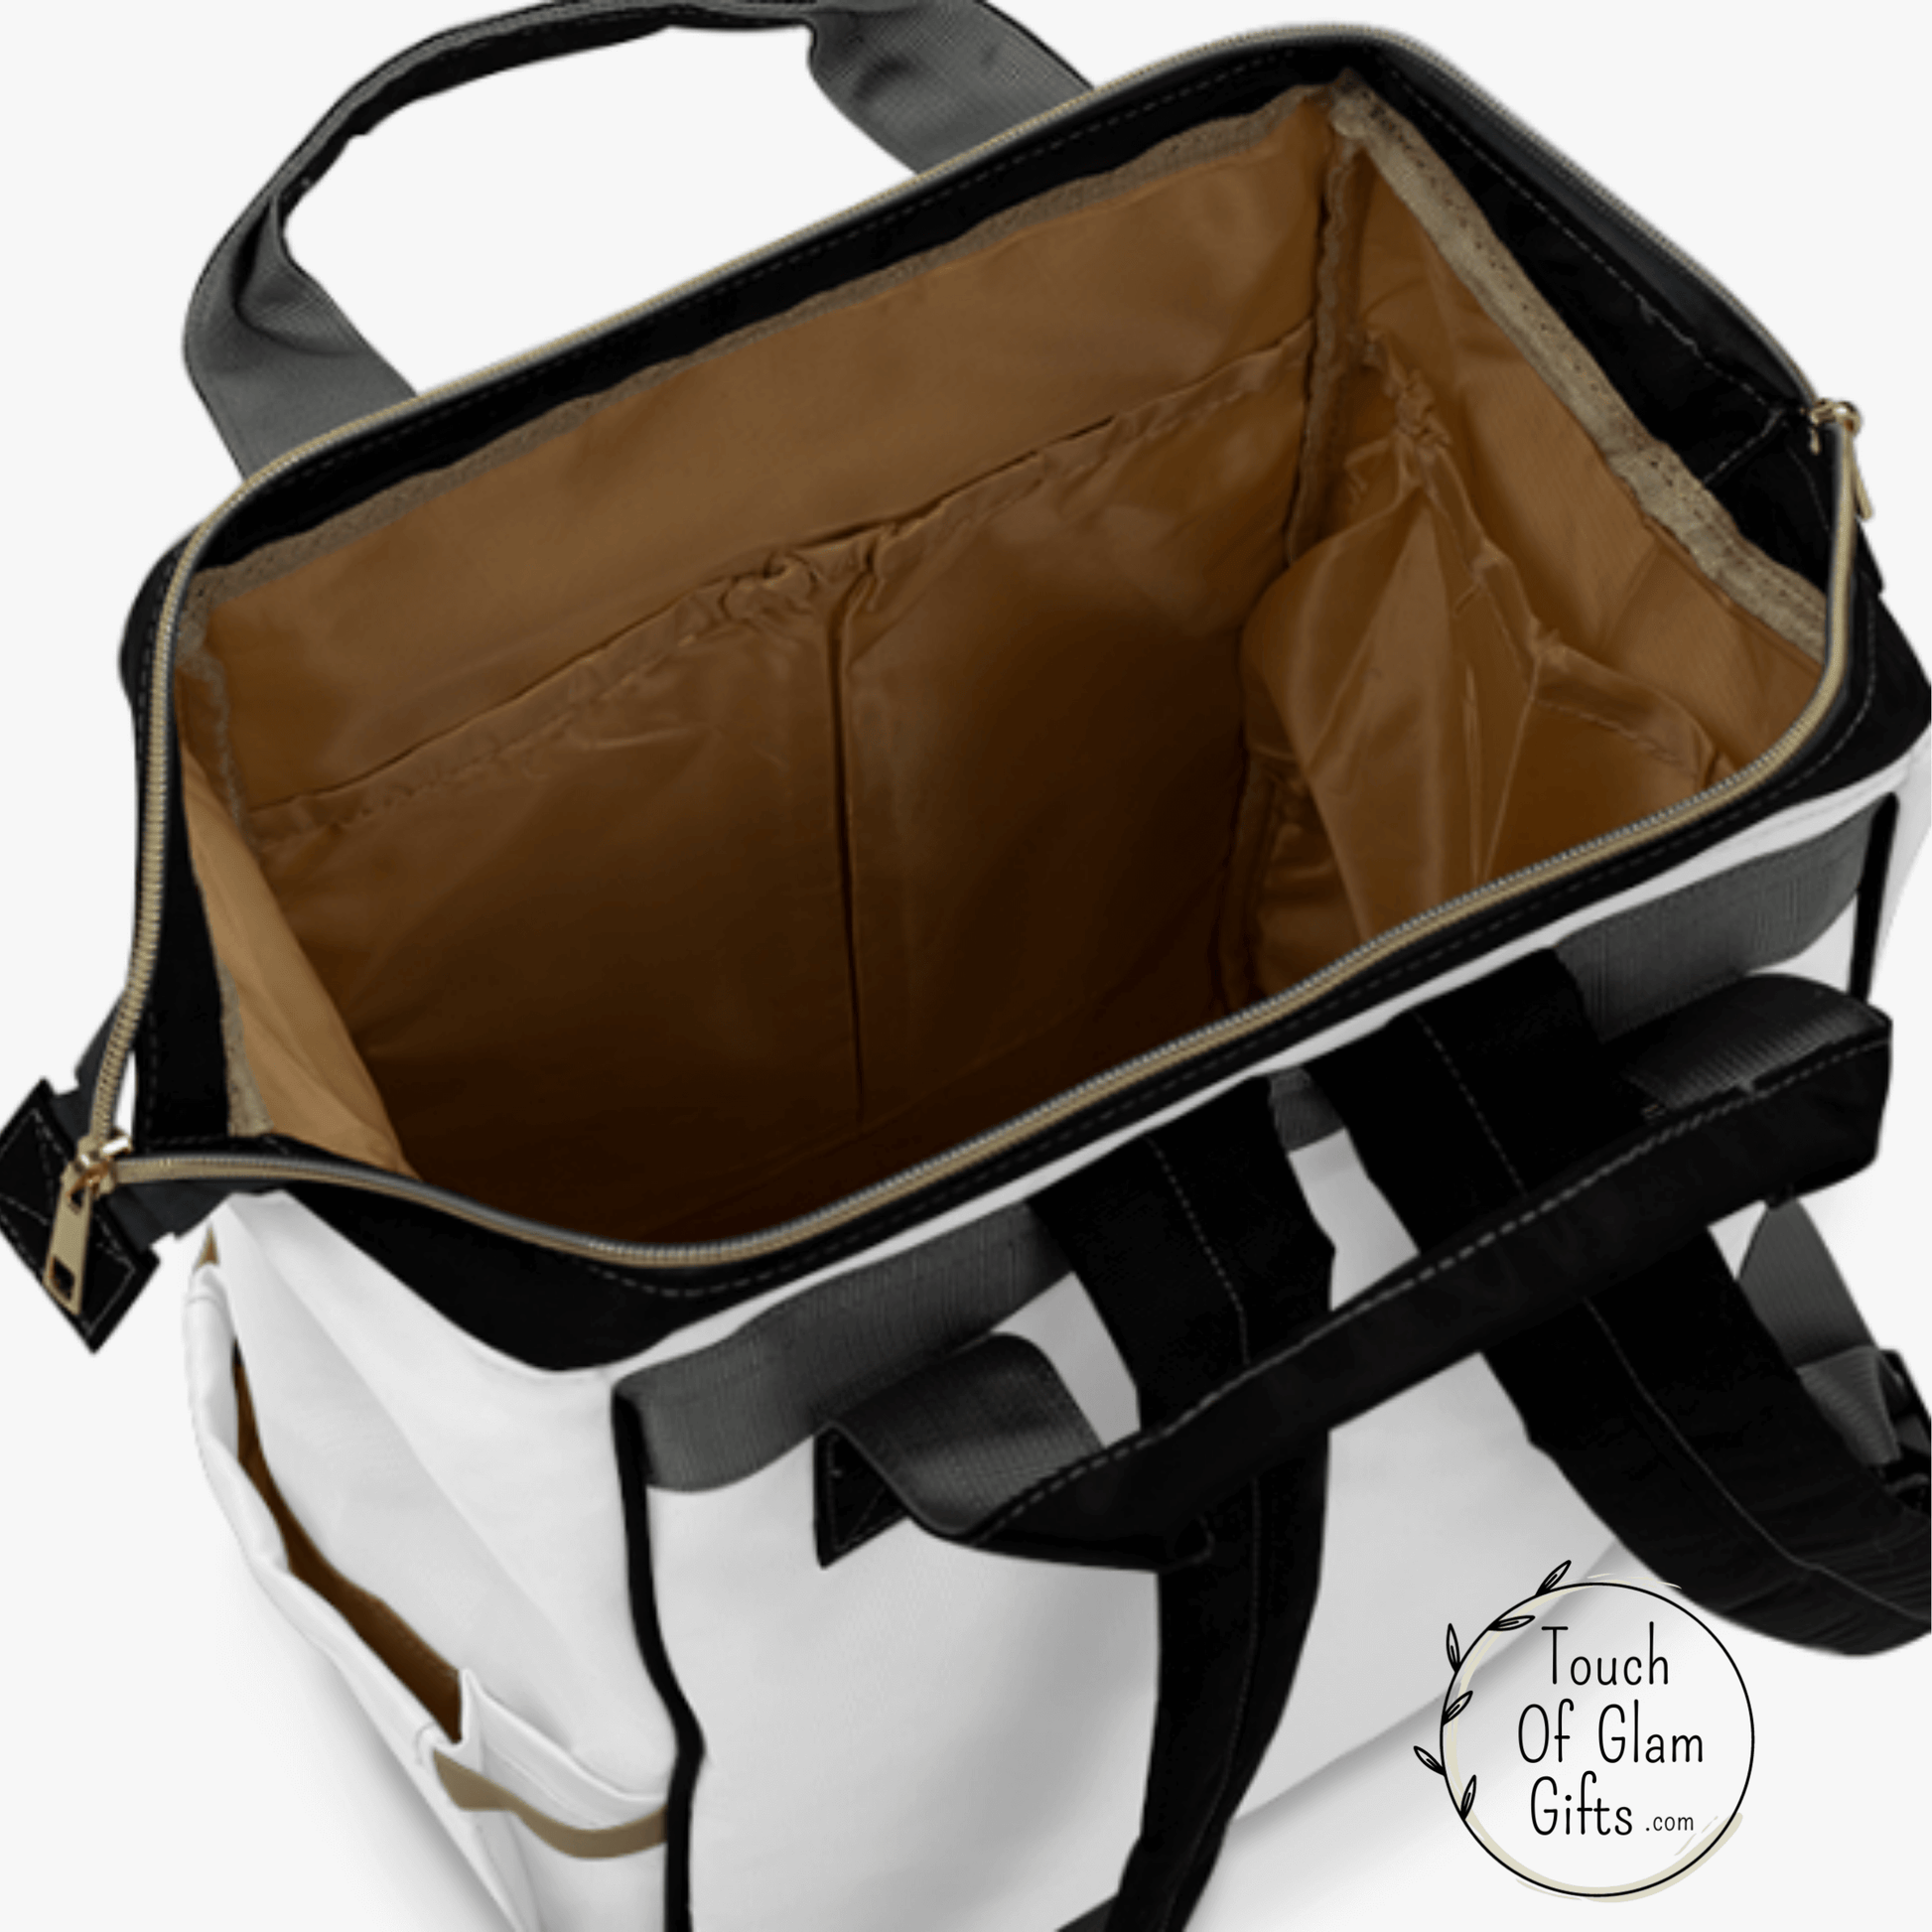 The inside of our cow hide diaper bag is tan colored and has multiple pockets for more organization. This bag stands up by itself when the main zipper is opened.